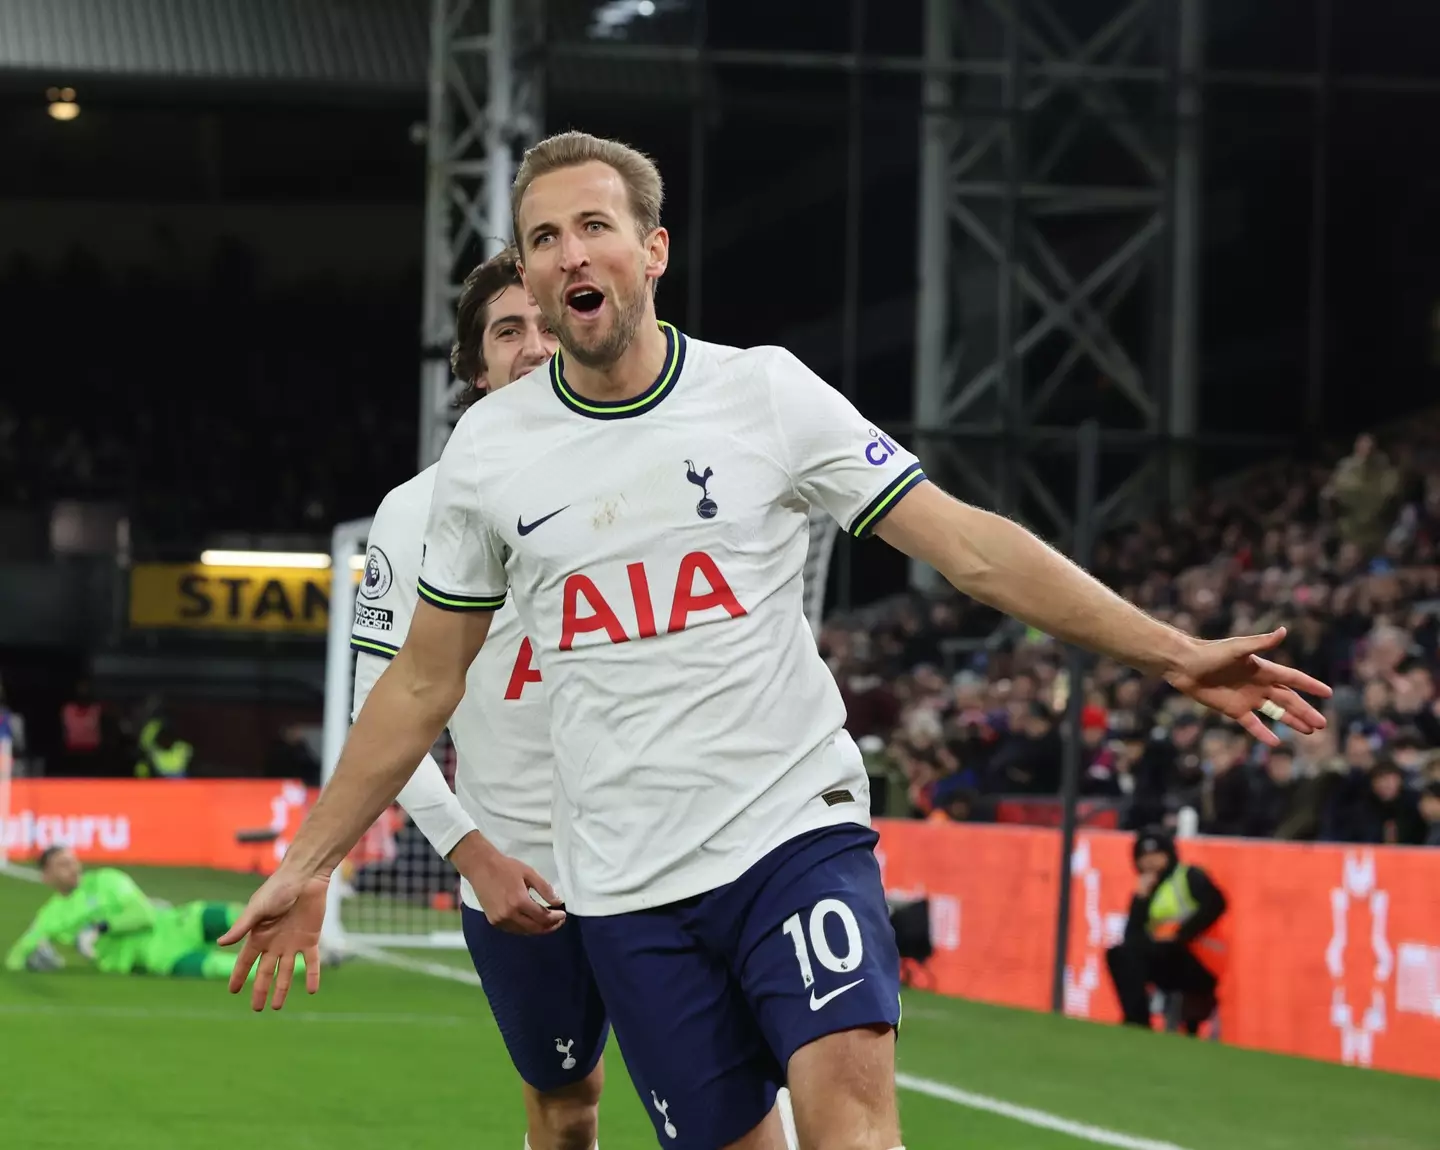 Arsenal legend Ian Wright believes Manchester United should sign Harry Kane from Tottenham in the summer transfer window.